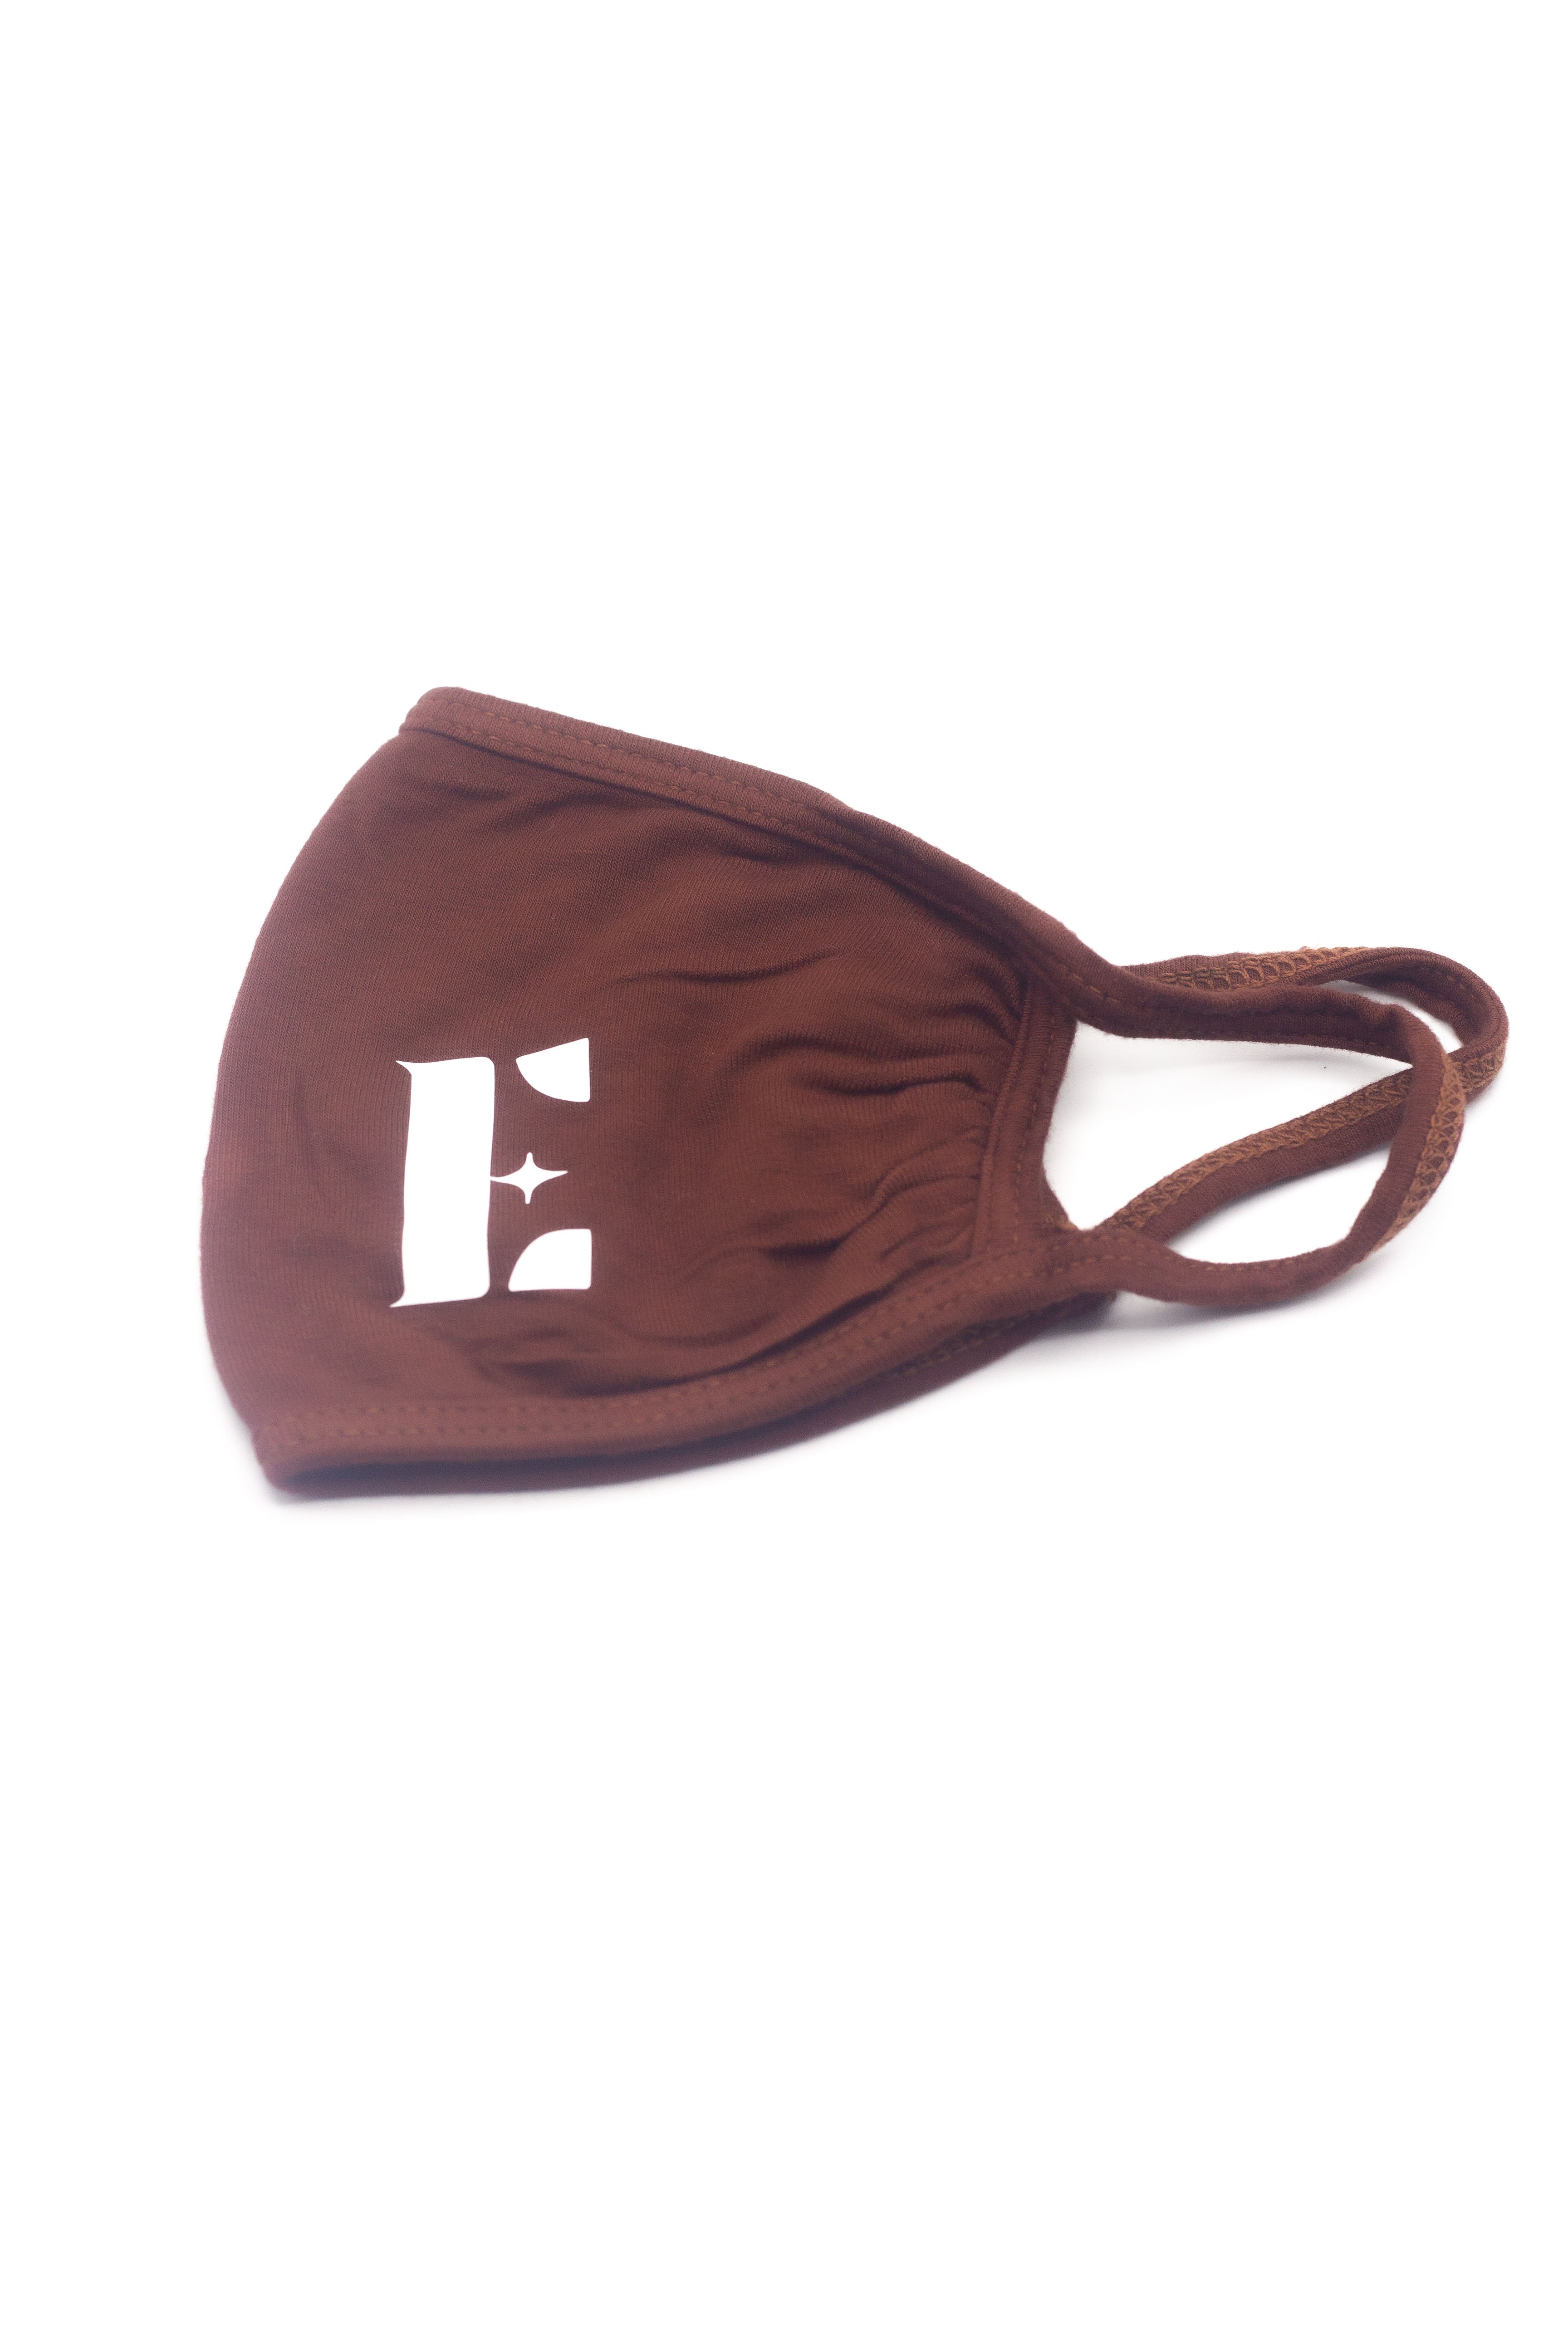 Dark orange reusable face mask. The face mask has the E's Element logo imprinted on the bottom left of it. Cinnamon Face Mask by E's Element.